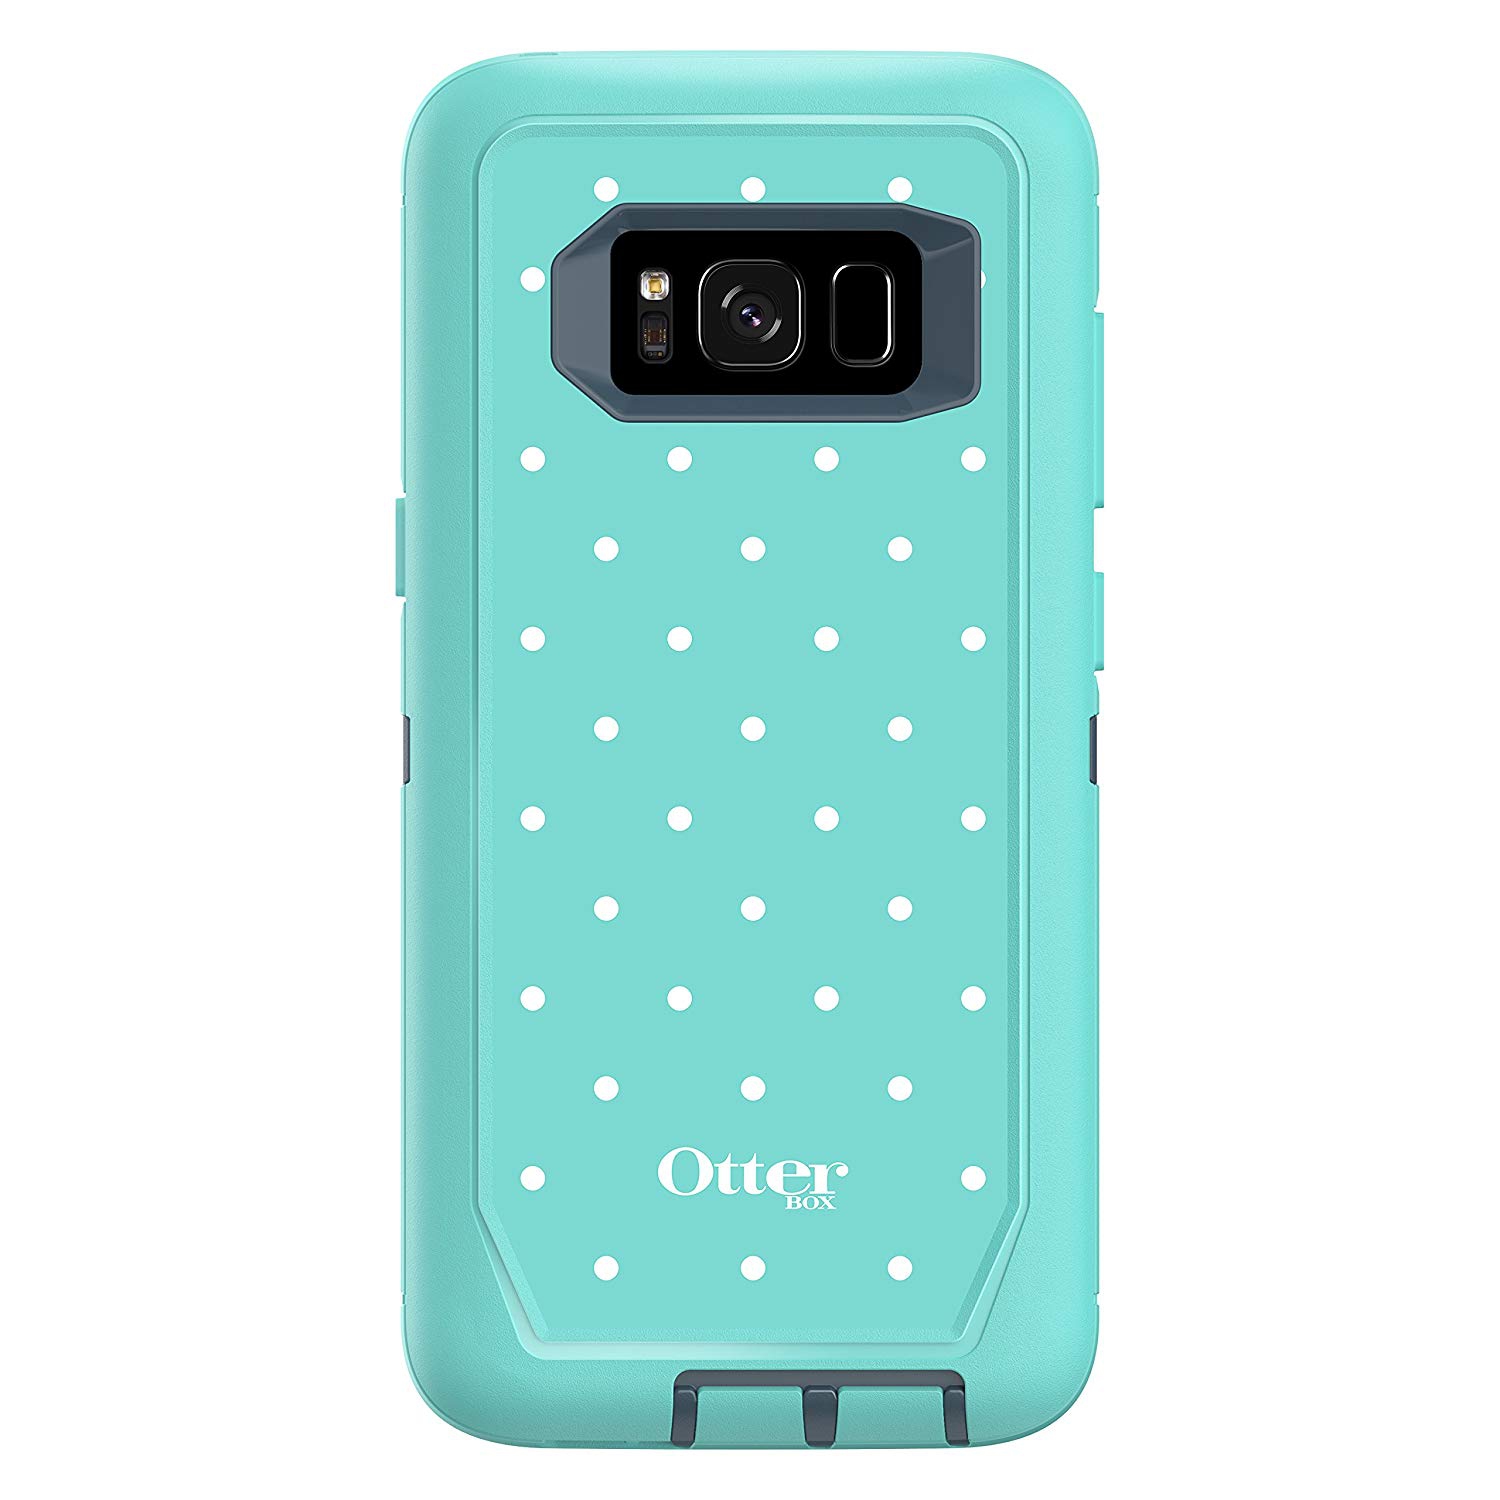 OtterBox DEFENDER SERIES SCREENLESS EDITION for Samsung Galaxy S8 - Retail Packaging